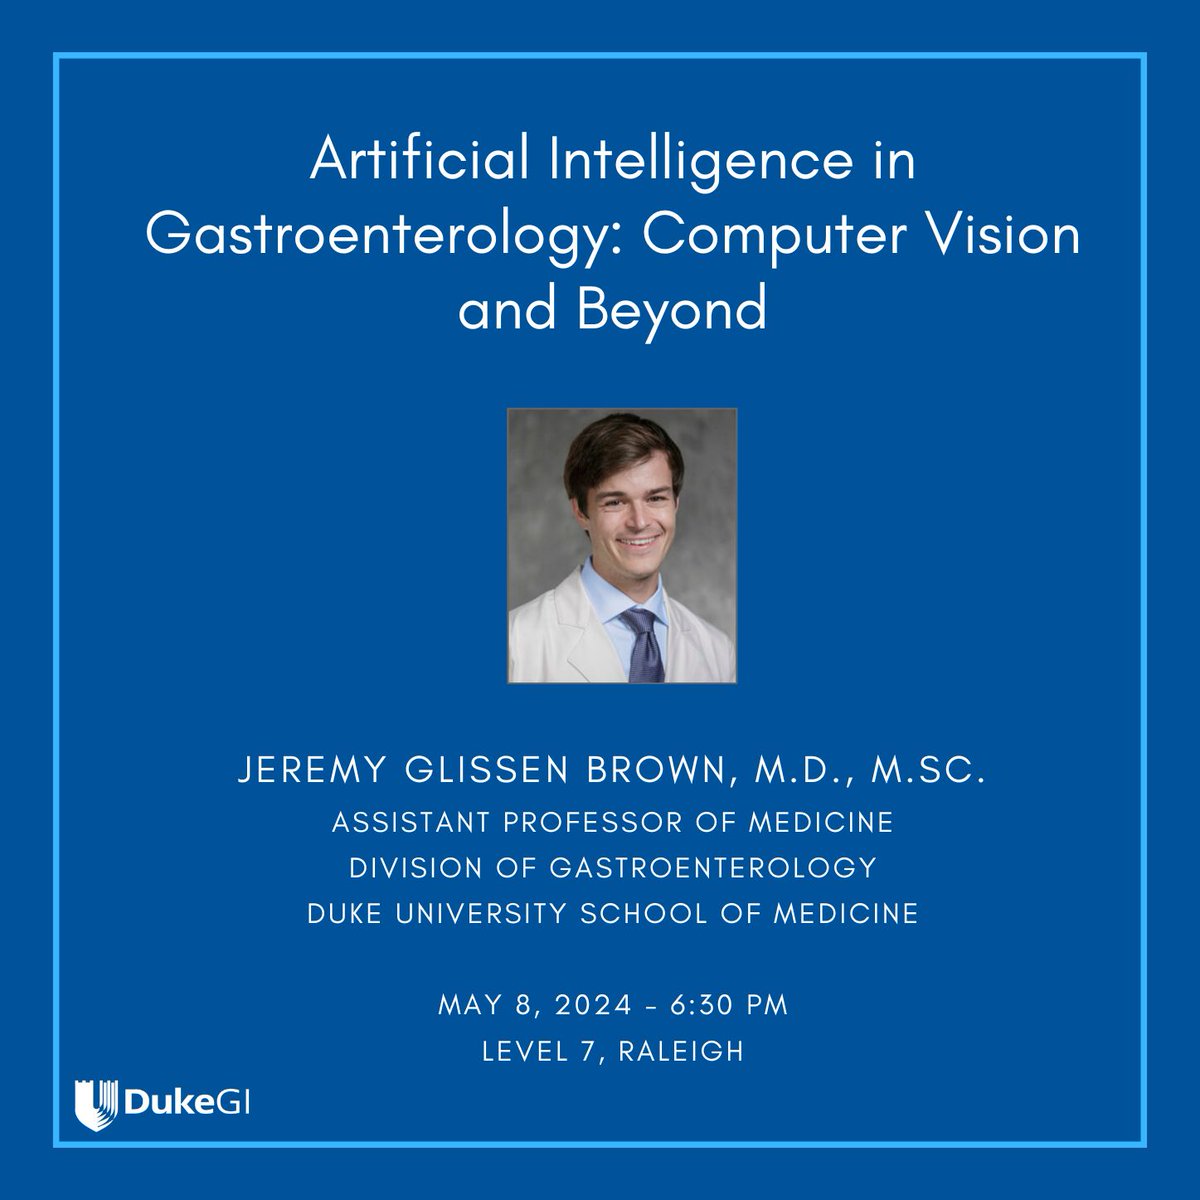 👉Tomorrow, May 8 @ 6:30PM: @jglissenbrown presents 'Artificial Intelligence in Gastroenterology: Computer Vision and Beyond'. Local GI docs, please RSVP with @ClubGut for this informative talk @Level7RoofBar